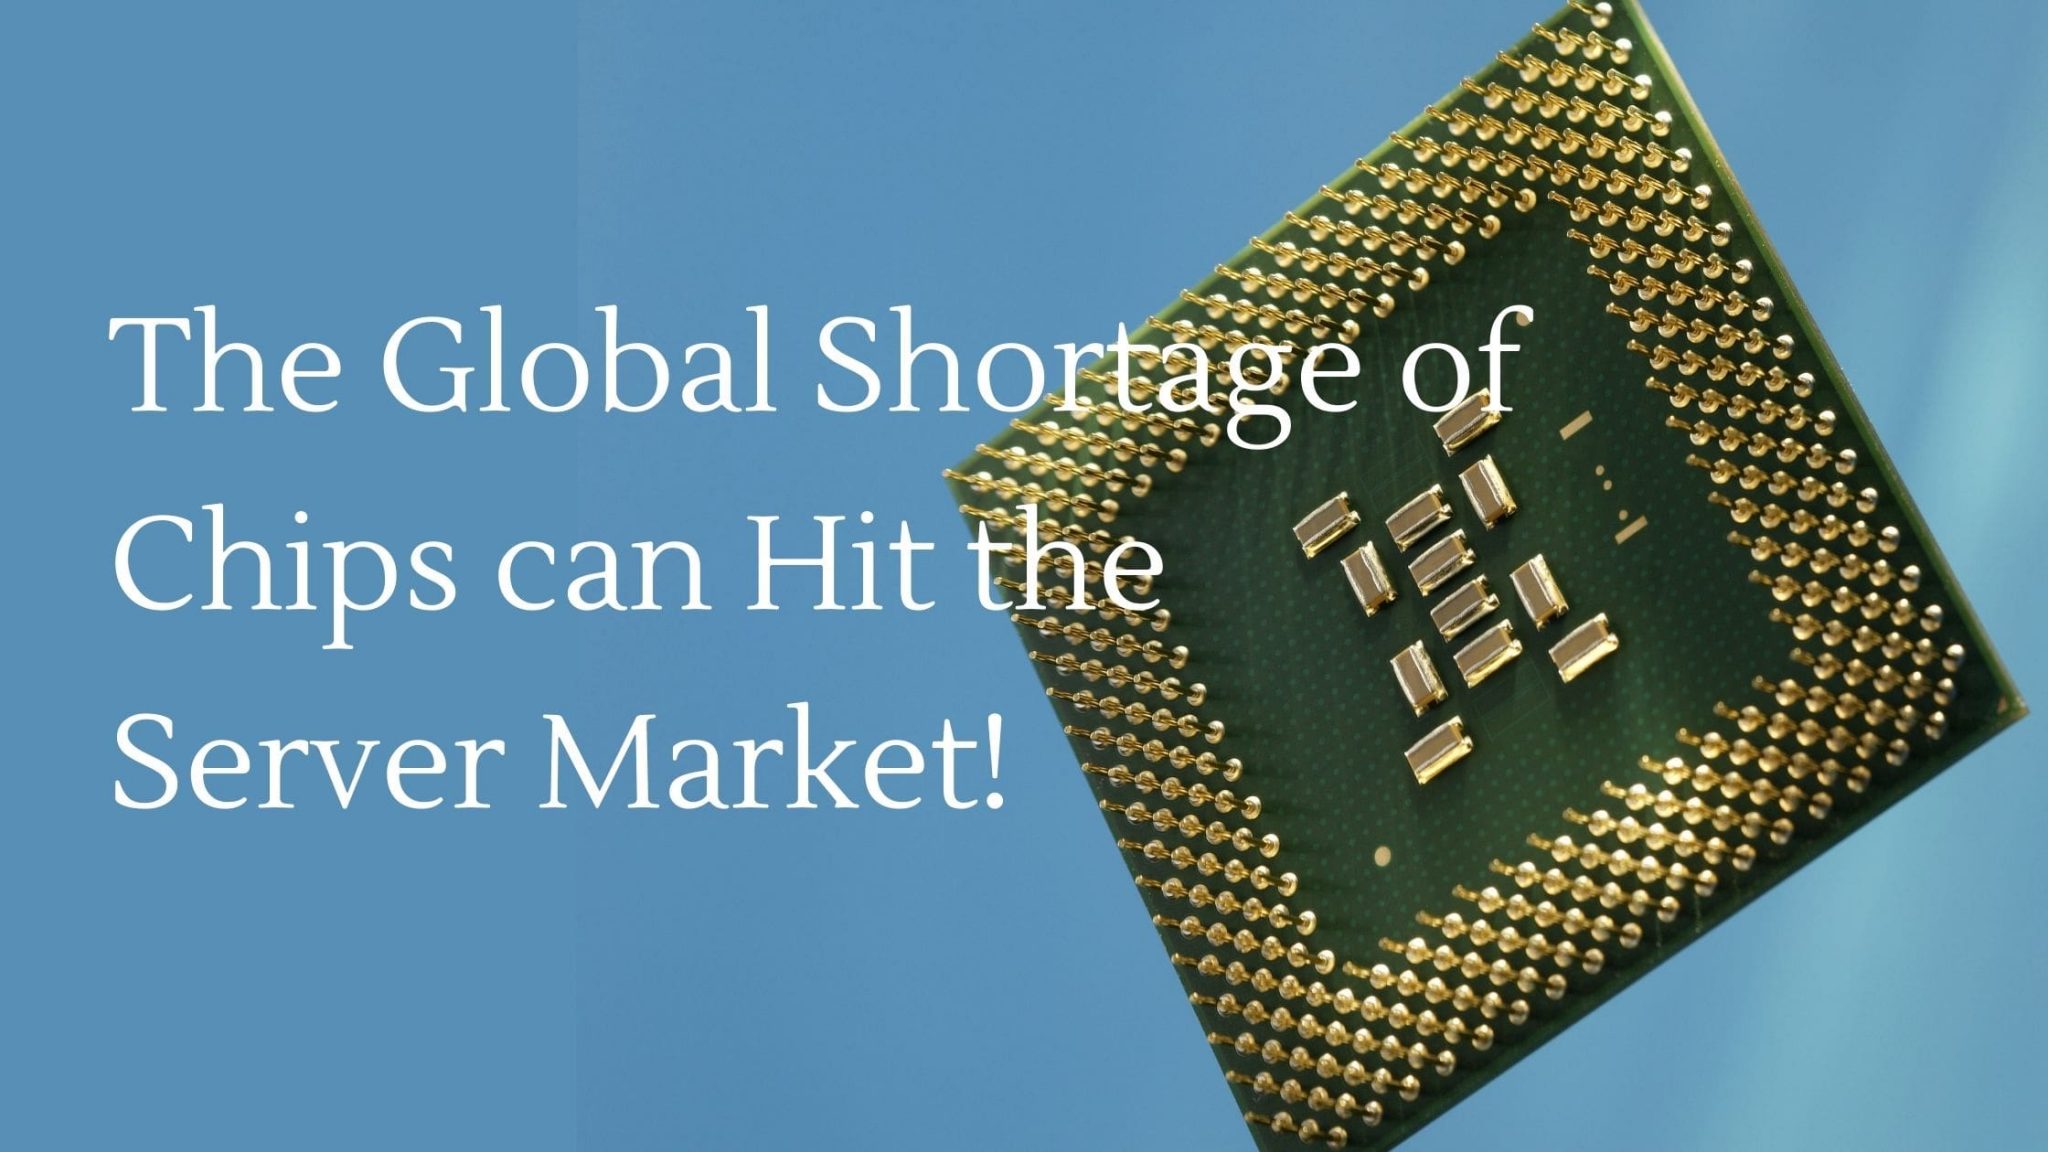 The global shortage of chips can hit the server market!